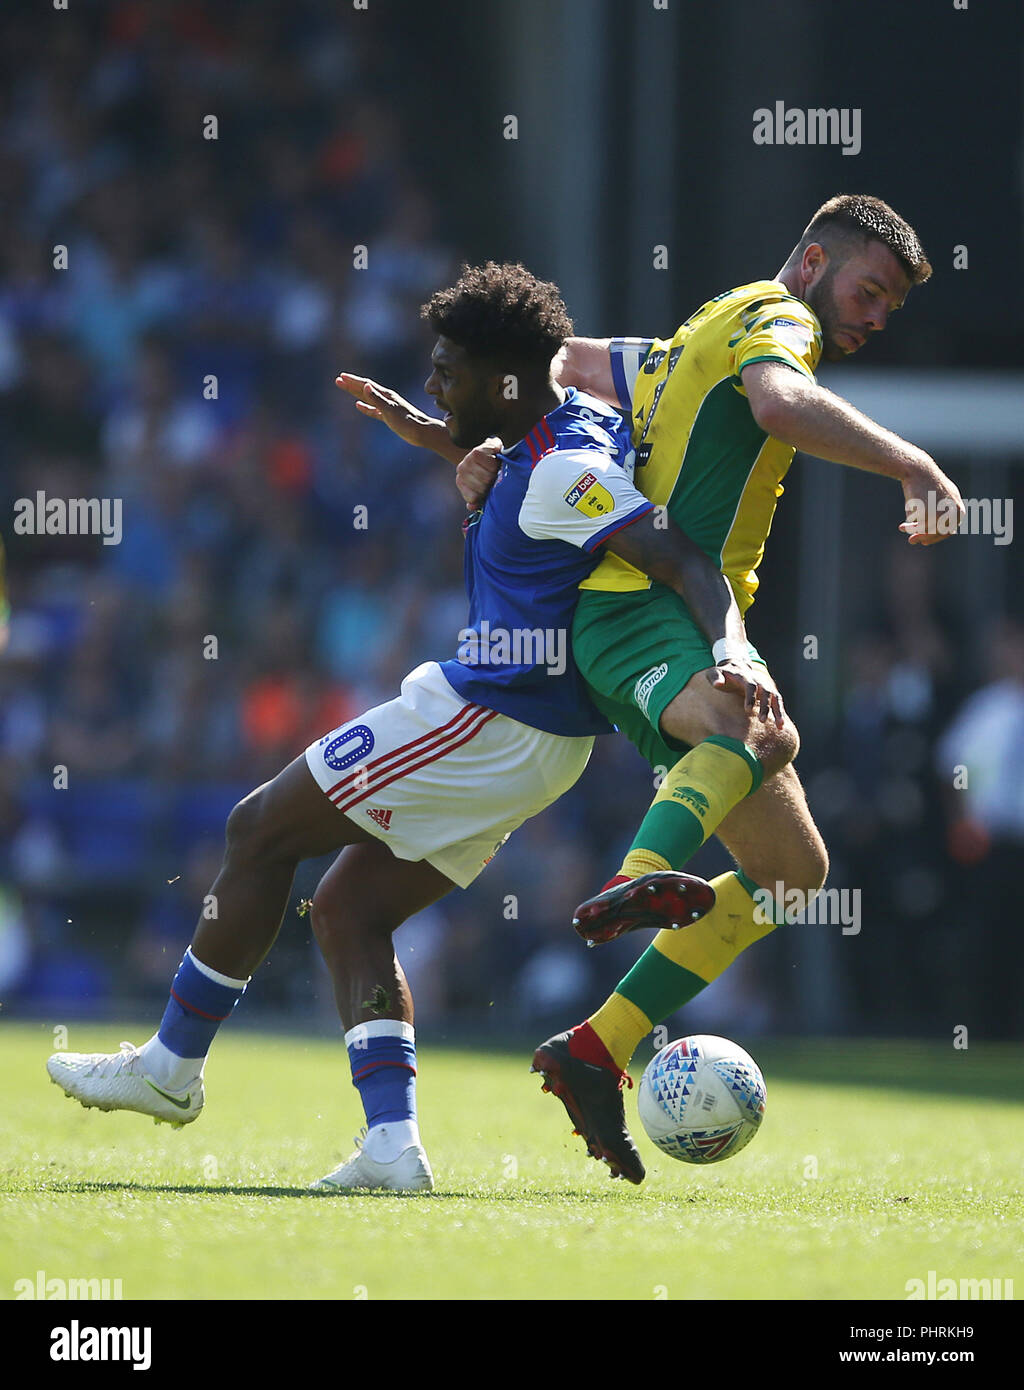 Norwich City's Grant Hanley (right) and Ipswich Town's Ellis Harrison in action during the Sky Bet Championship match at Portman Road, Ipswich. PRESS ASSOCIATION Photo. Picture date: Sunday September 2, 2018. See PA story SOCCER Ipswich. Photo credit should read: Steven Paston/PA Wire. RESTRICTIONS: EDITORIAL USE ONLY No use with unauthorised audio, video, data, fixture lists, club/league logos or "live" services. Online in-match use limited to 120 images, no video emulation. No use in betting, games or single club/league/player publications. Stock Photo